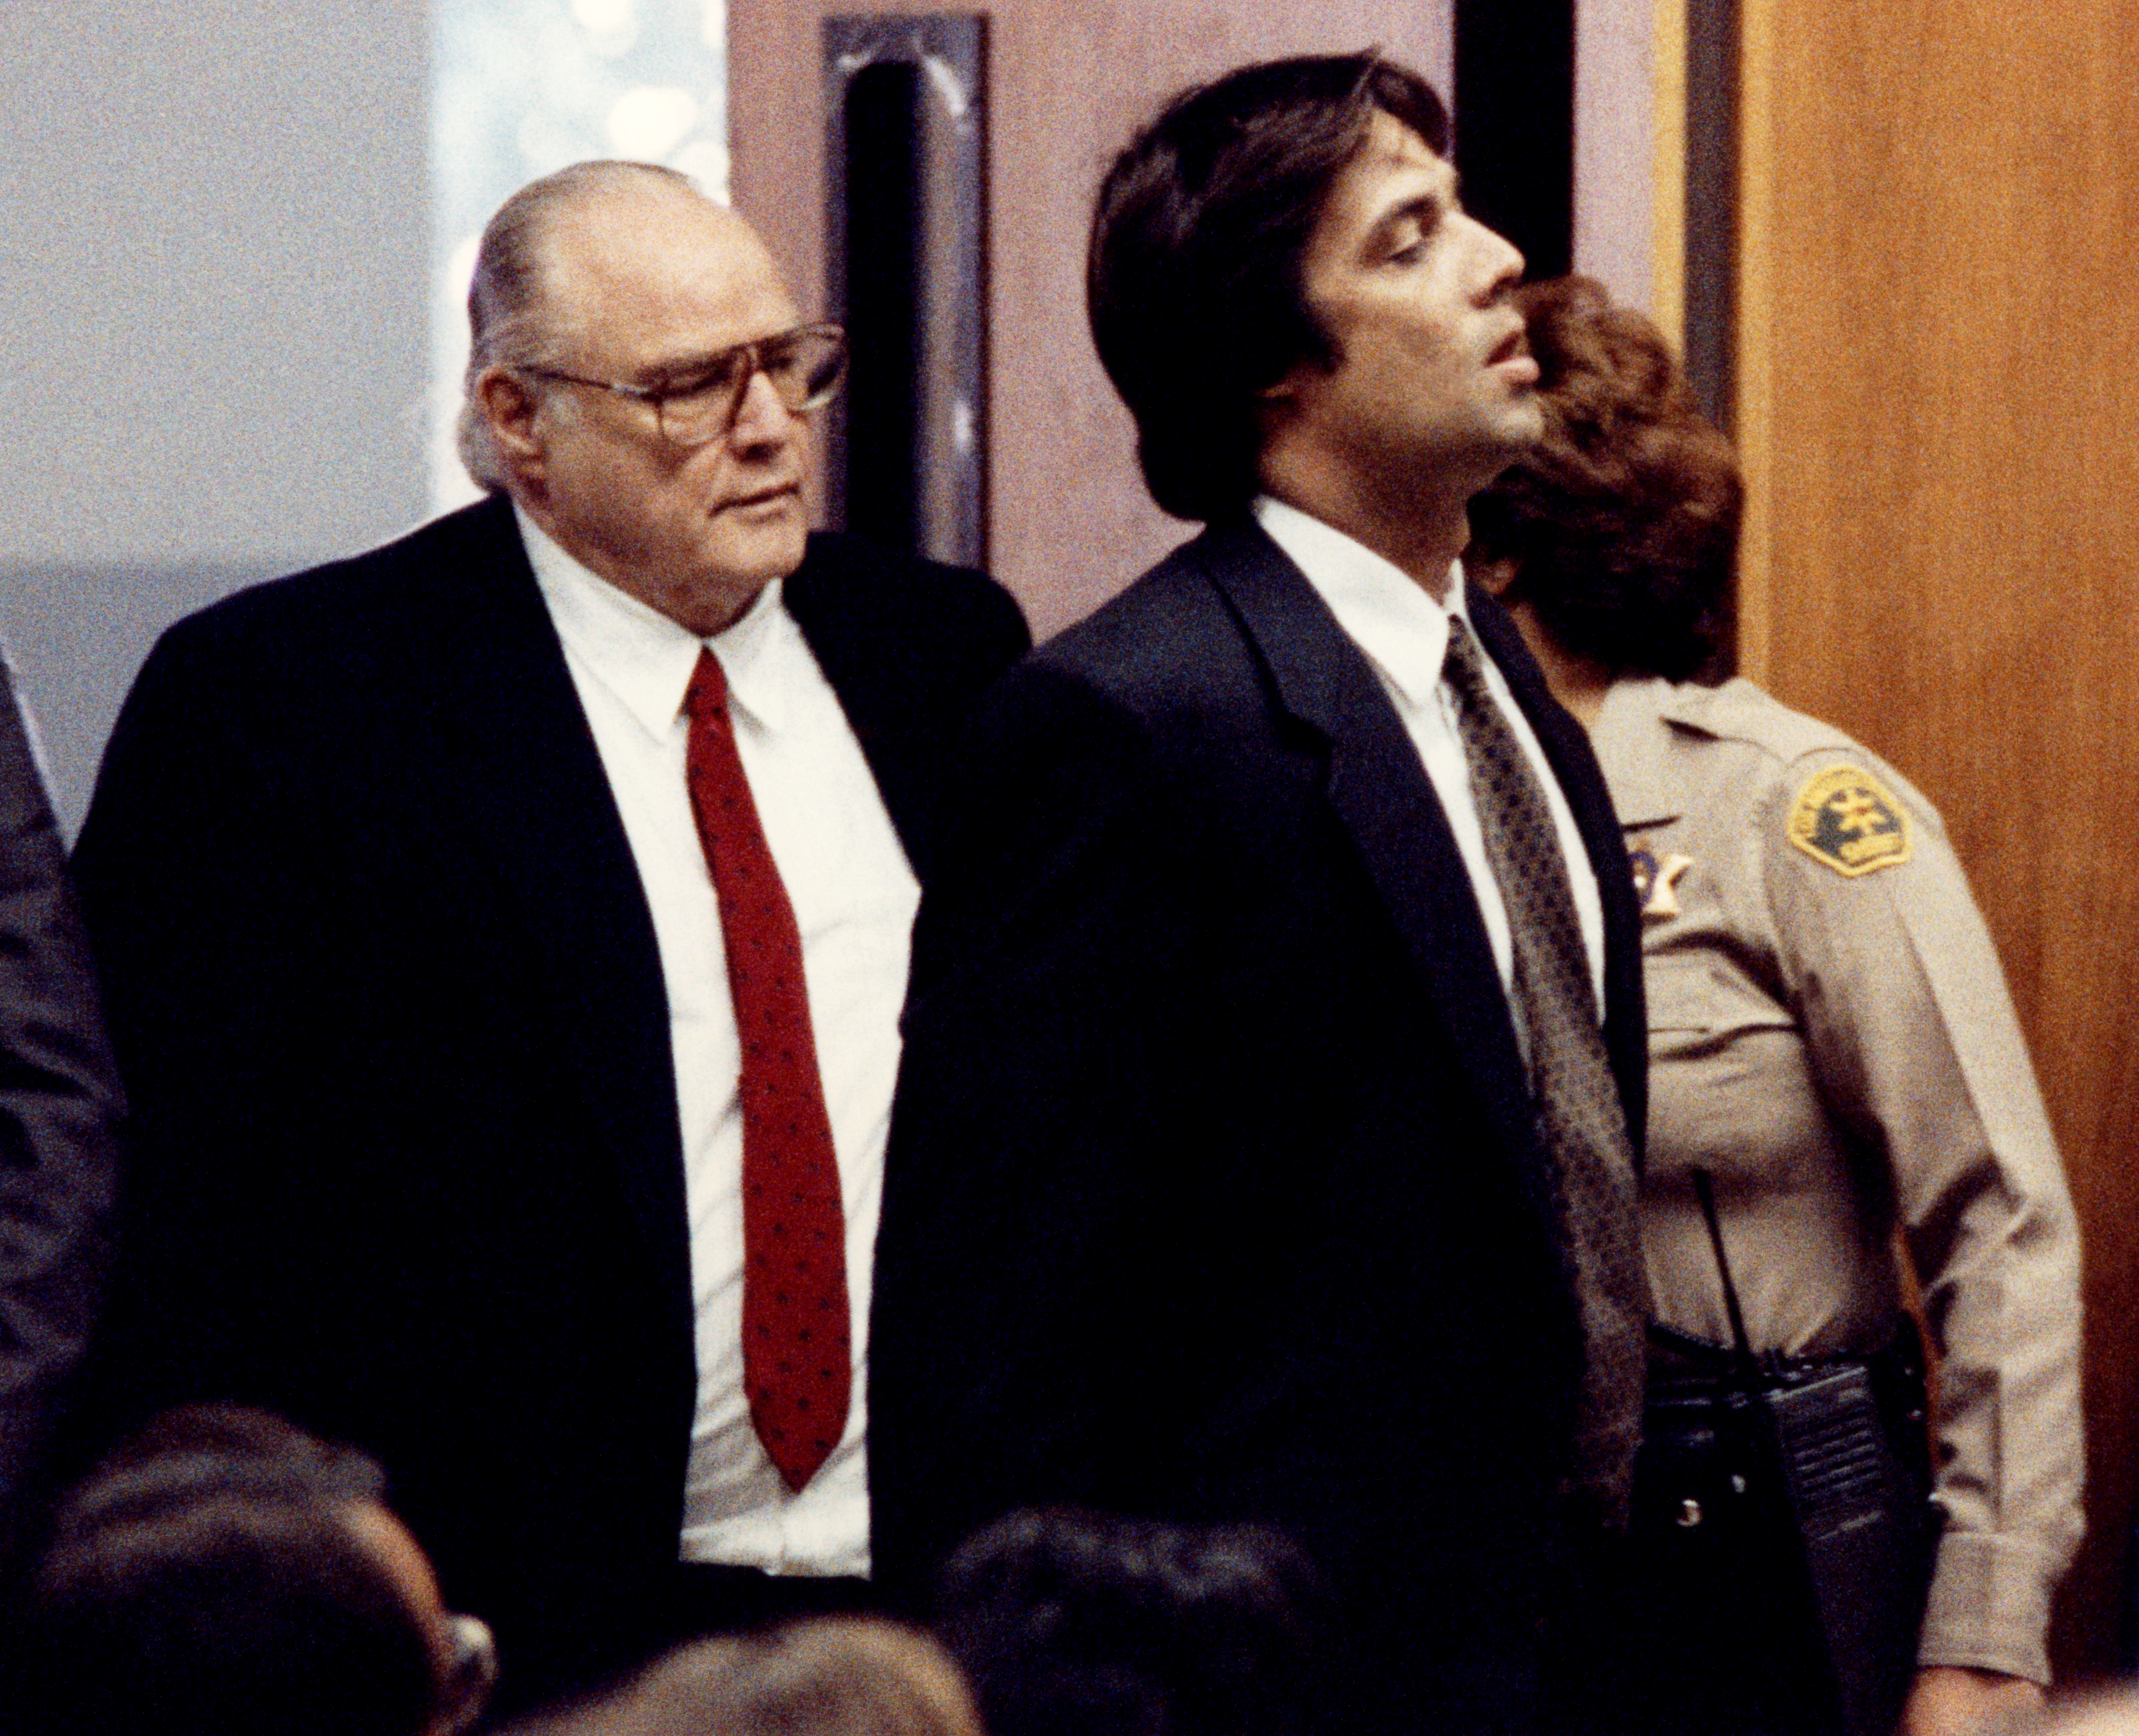 Marlon Brando and his son Christian Brando entering the courtroom during Christian's trial for the murder of Dag Drollet, circa 1990 in Santa Monica, California | Source: Getty Images